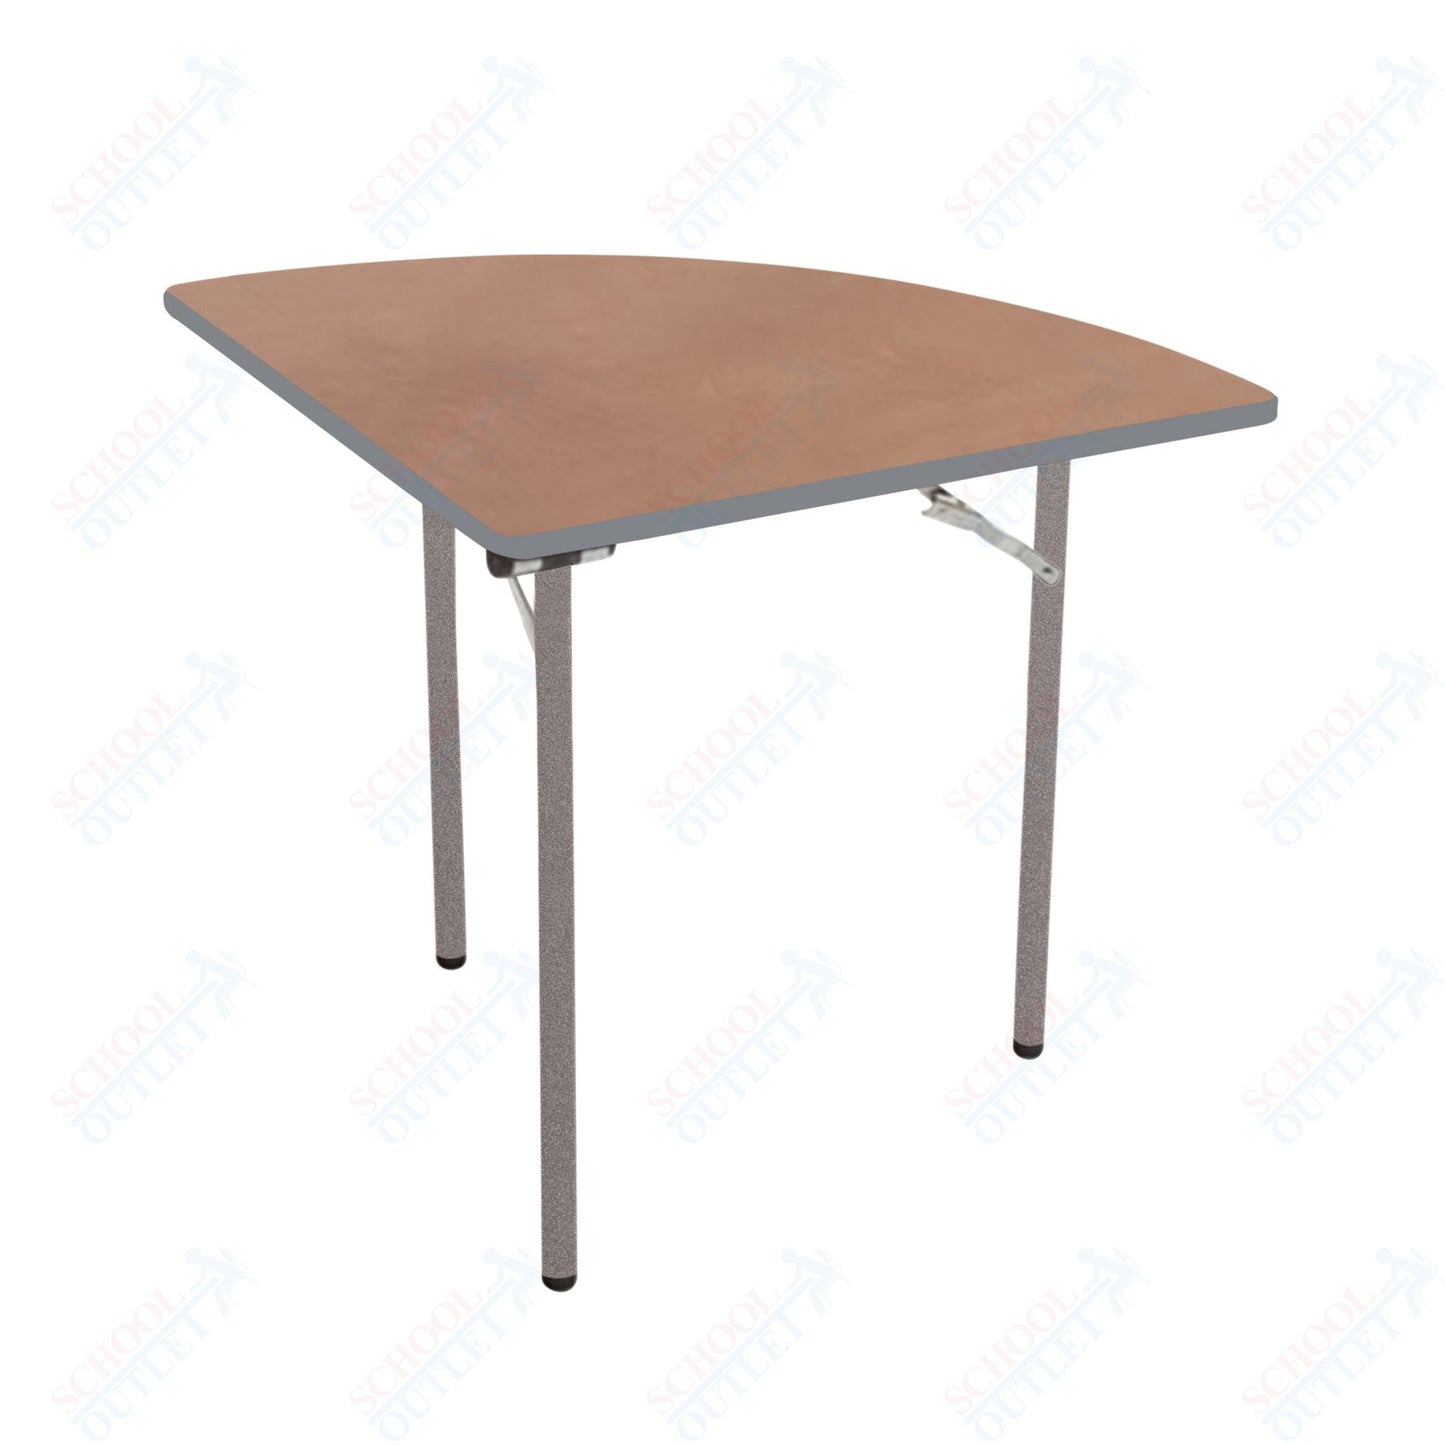 AmTab Folding Table - Plywood Stained and Sealed - Vinyl T - Molding Edge - Quarter Round - Quarter 96" Diameter x 29"H (AmTab AMT - QR96PM) - SchoolOutlet